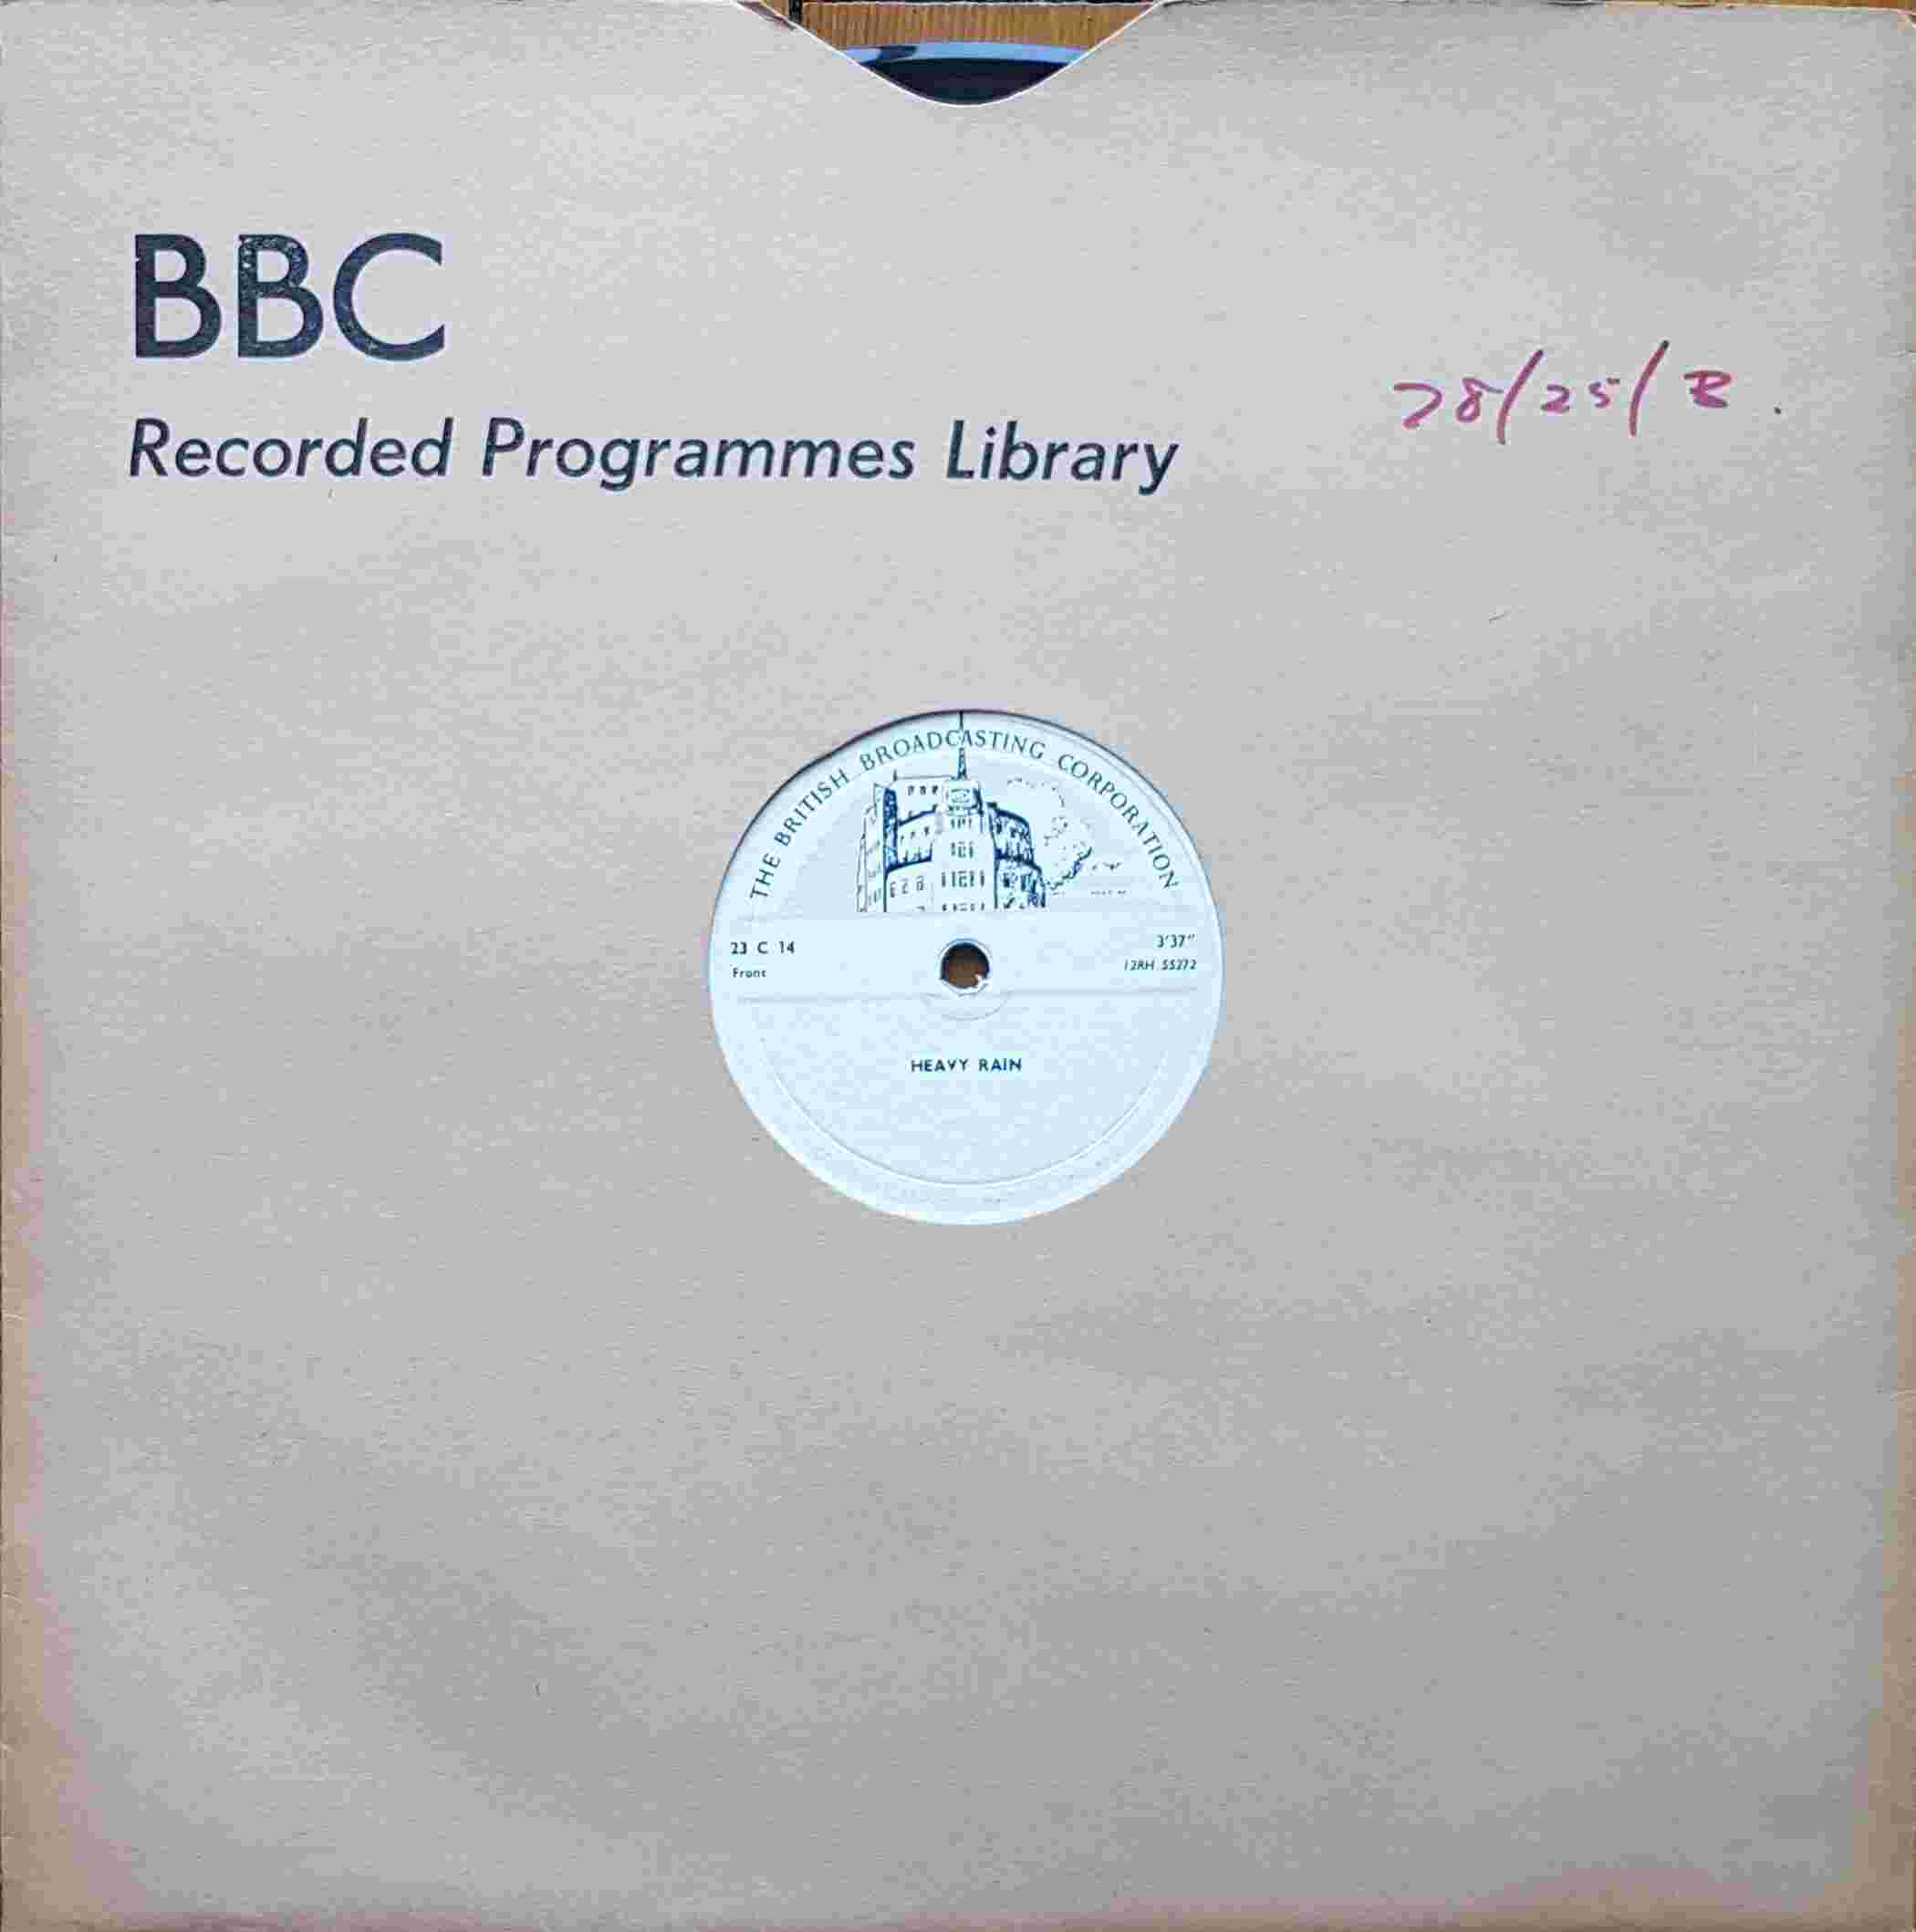 Picture of 23 C 14 Heavy rain / Thunder by artist Not registered from the BBC 78 - Records and Tapes library